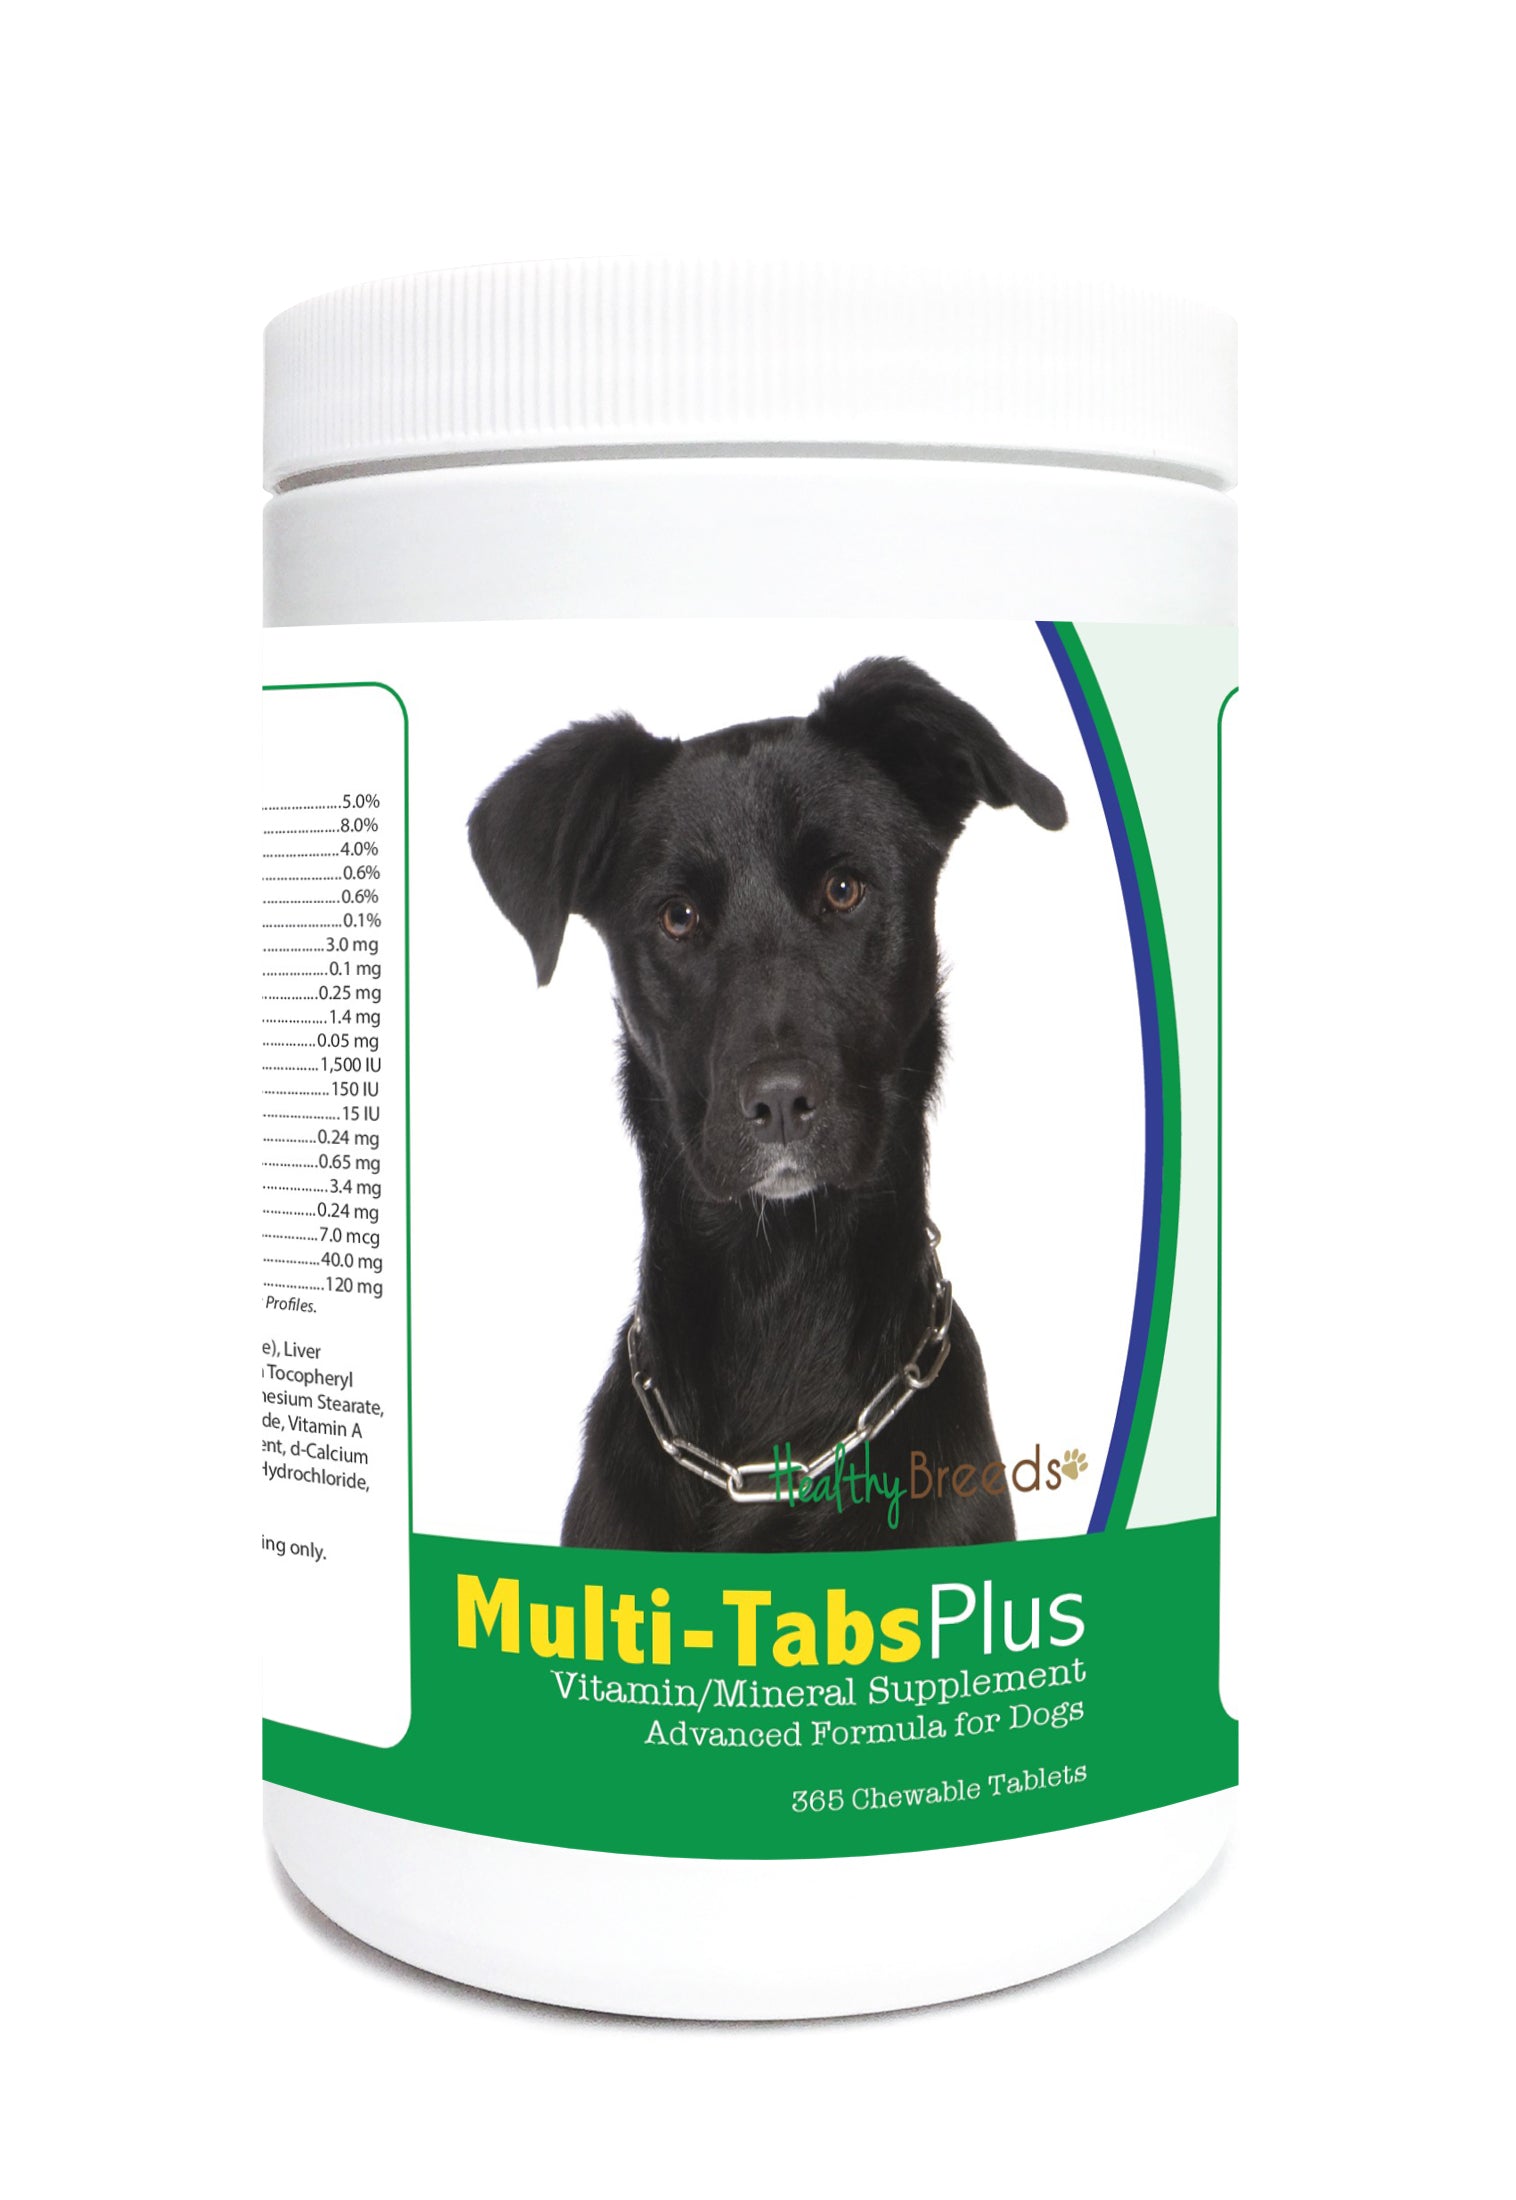 Mutt Multi-Tabs Plus Chewable Tablets 365 Count